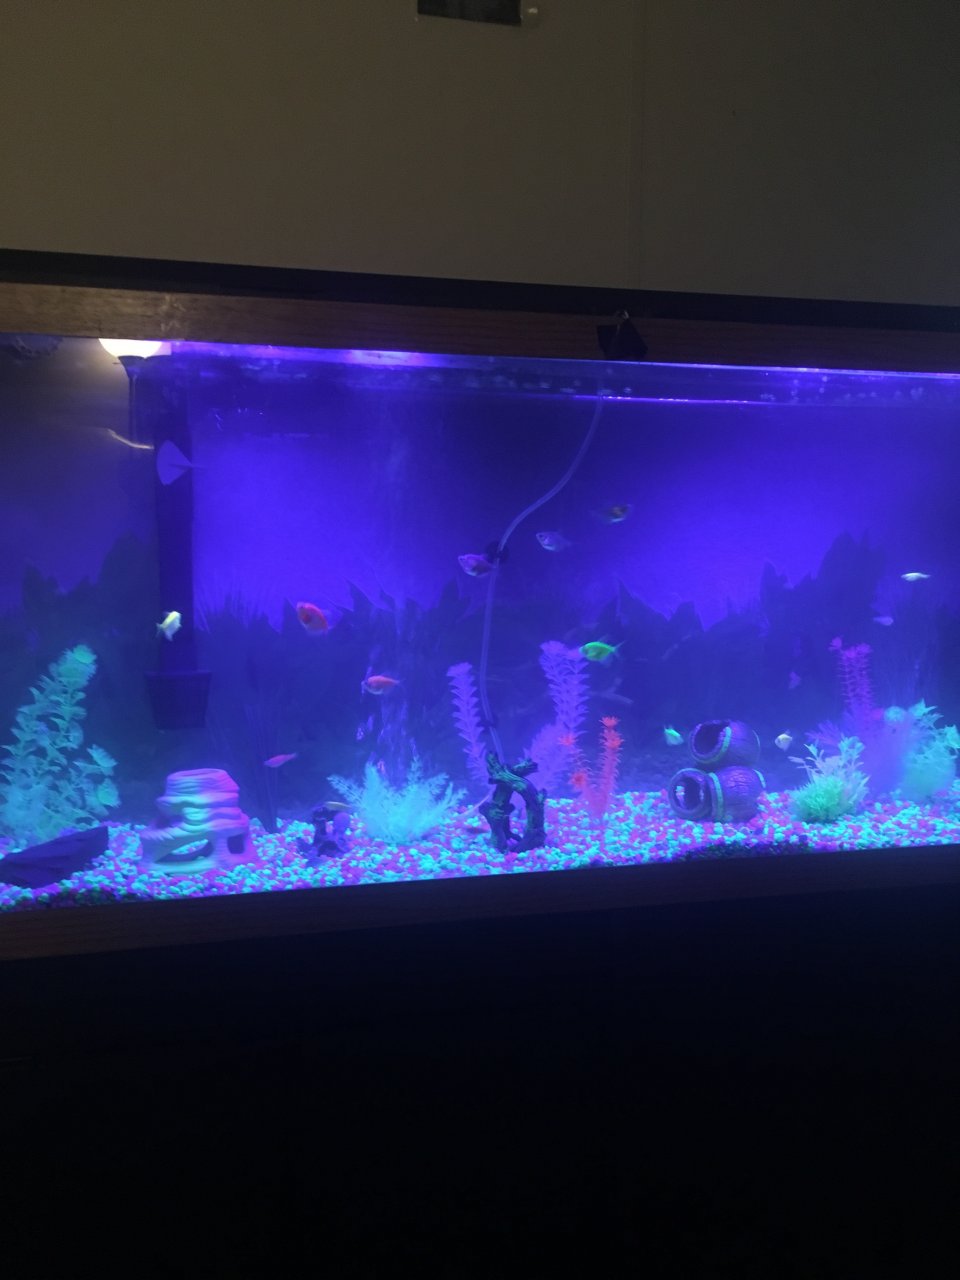 I Have 16 Glofish And 4 Cory Cats. Will They Be Happy? They Are In